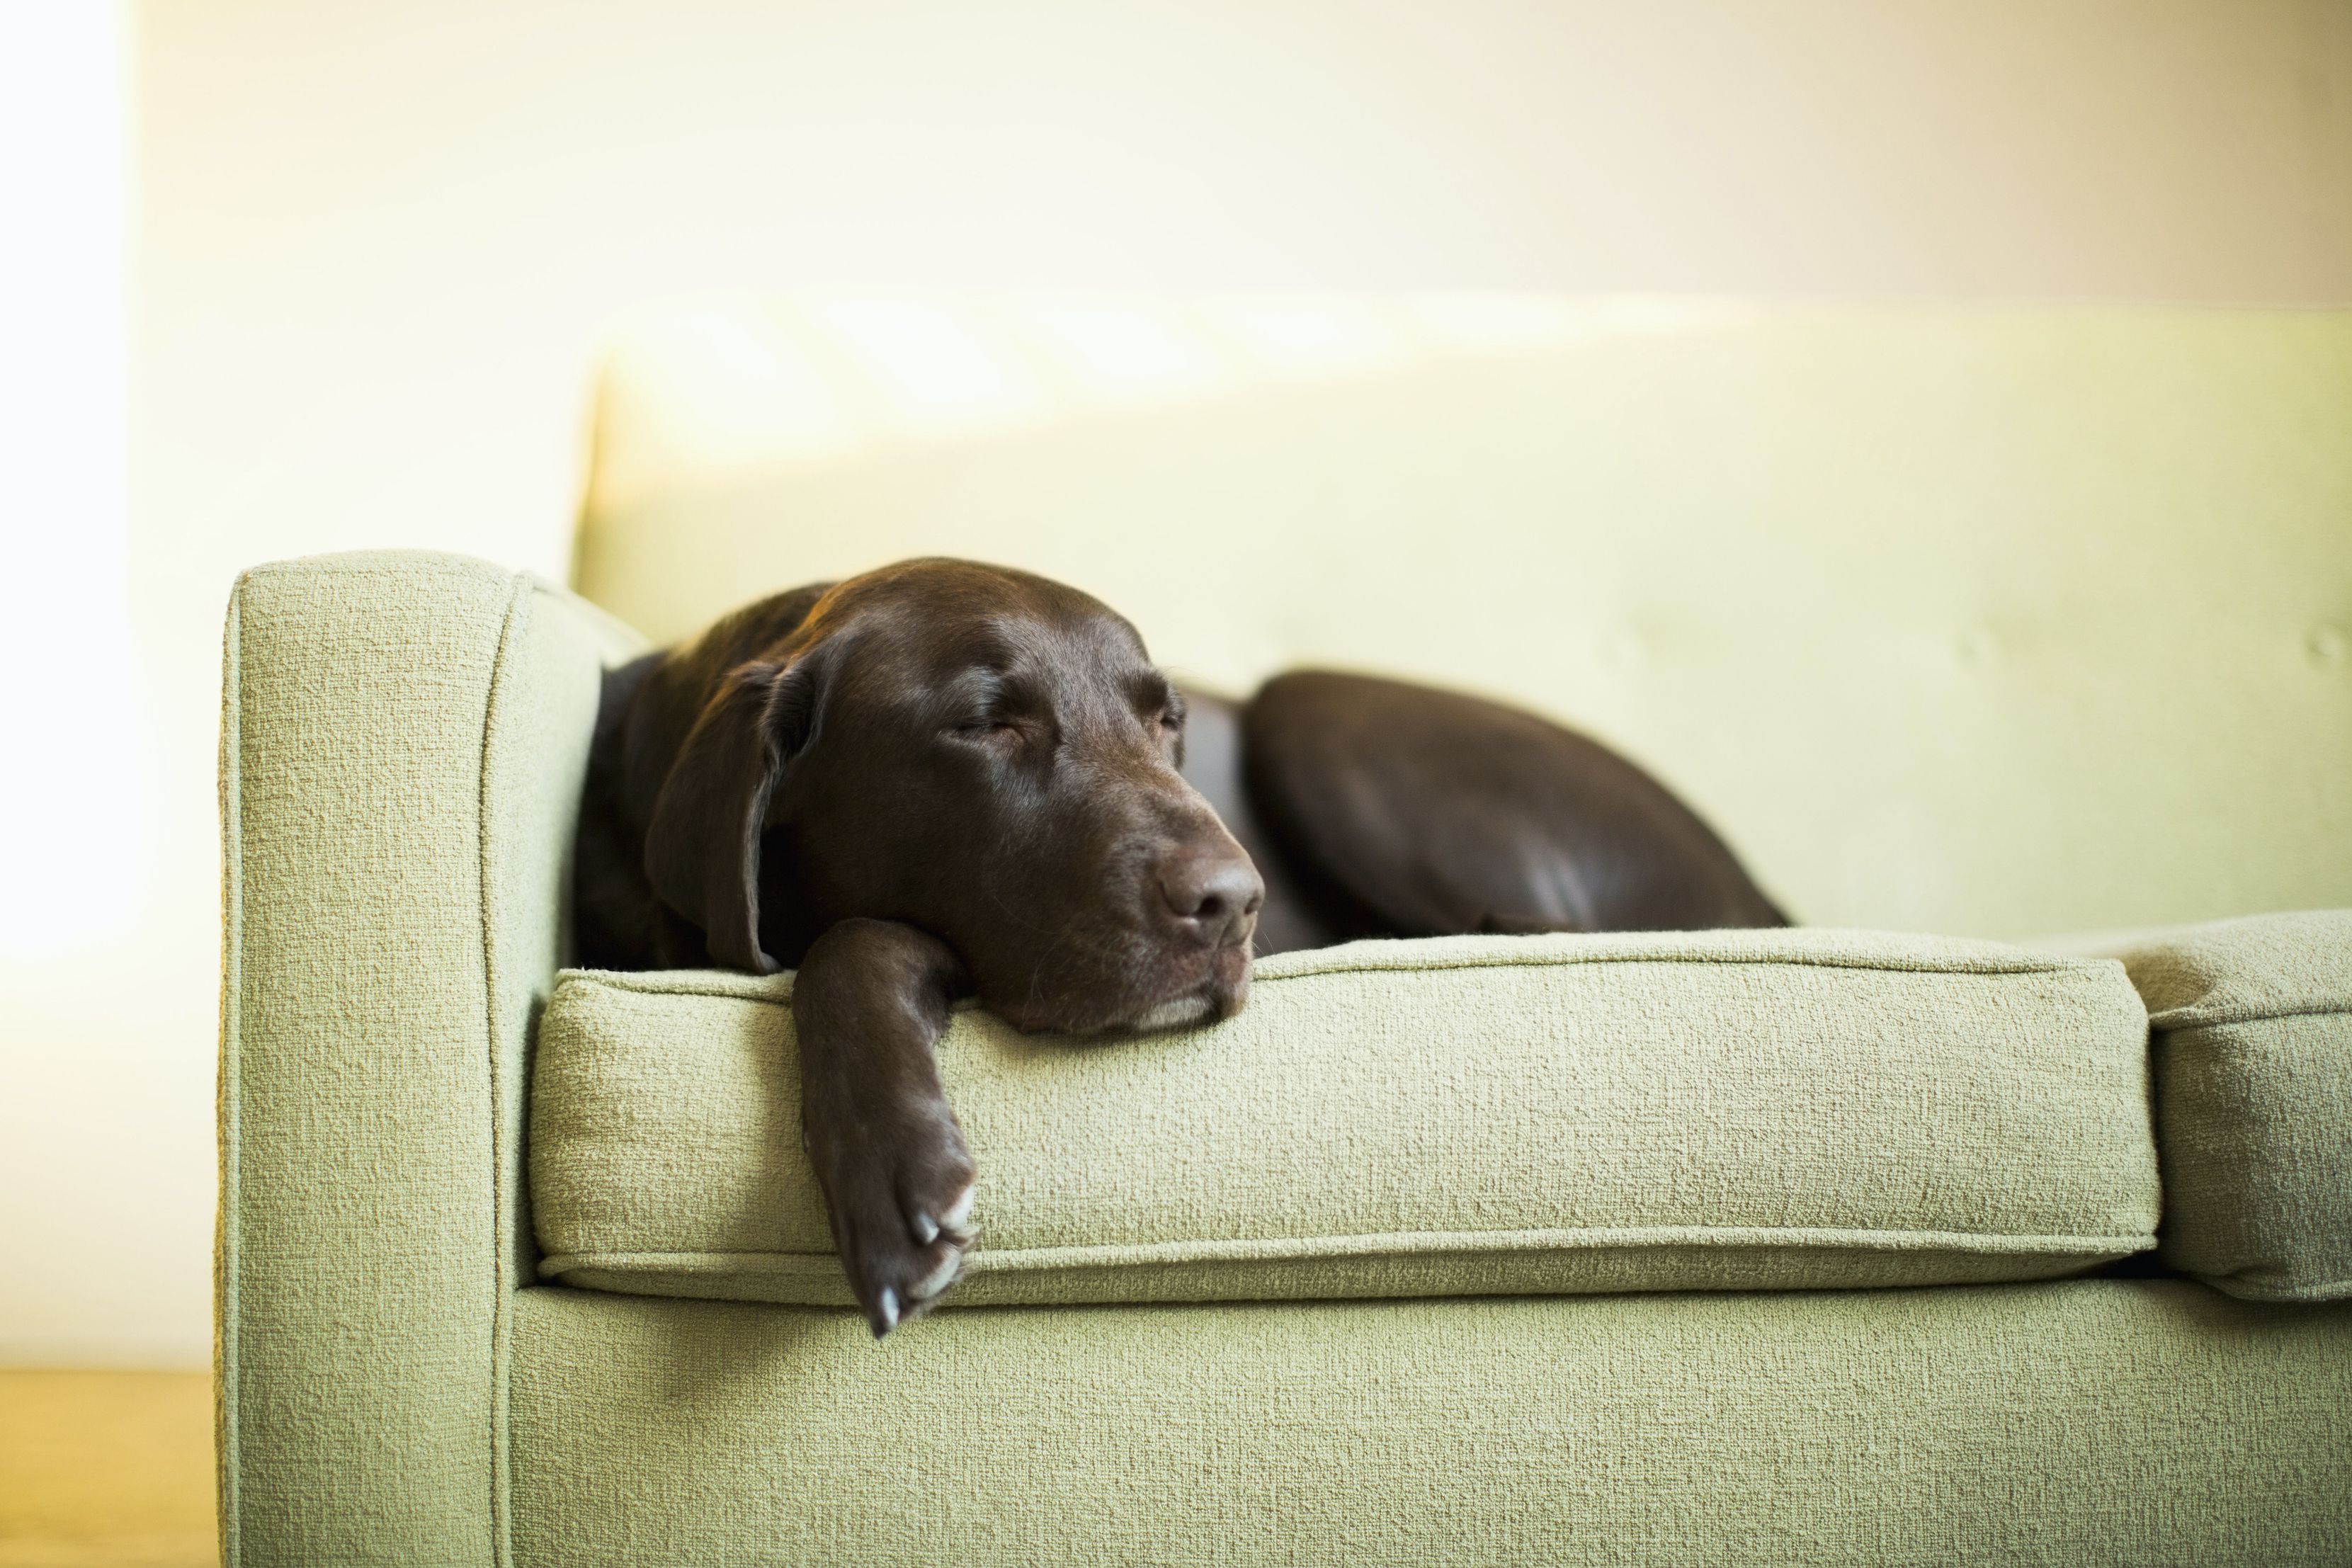 is paracetamol safe for dogs